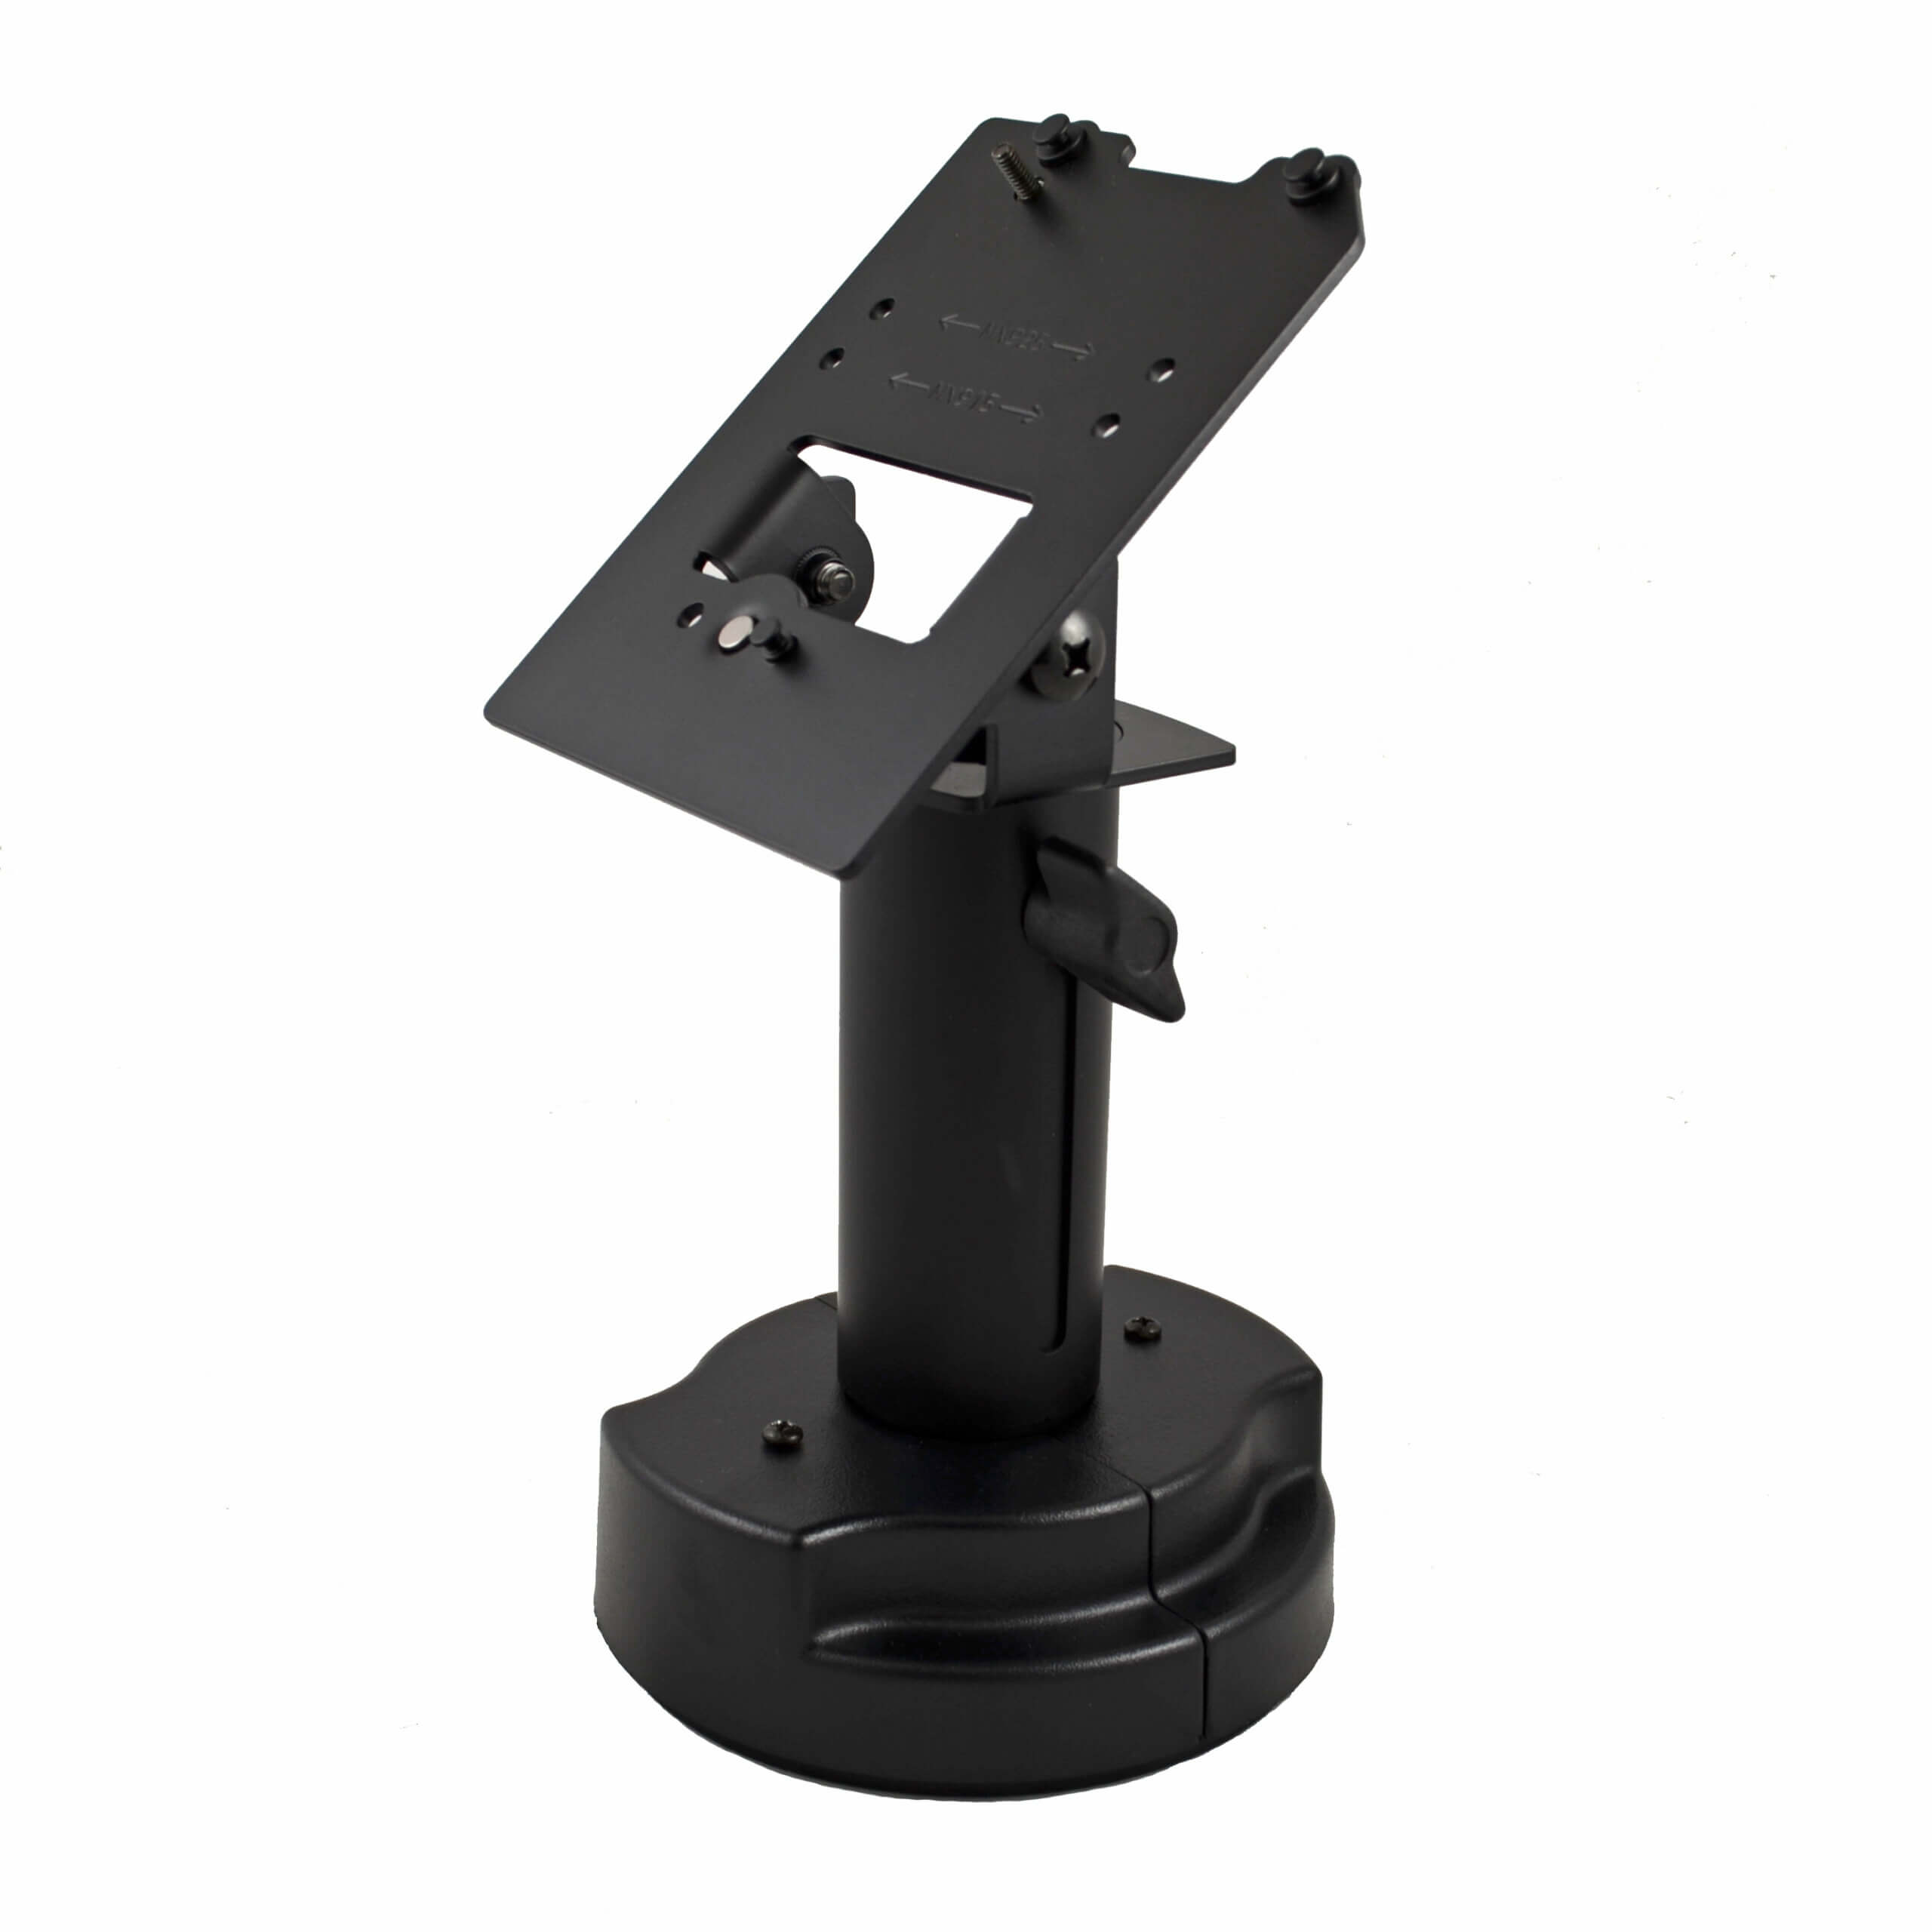 Telescoping Stand for Verifone MX915/MX925/M424/M425 Payment Terminals